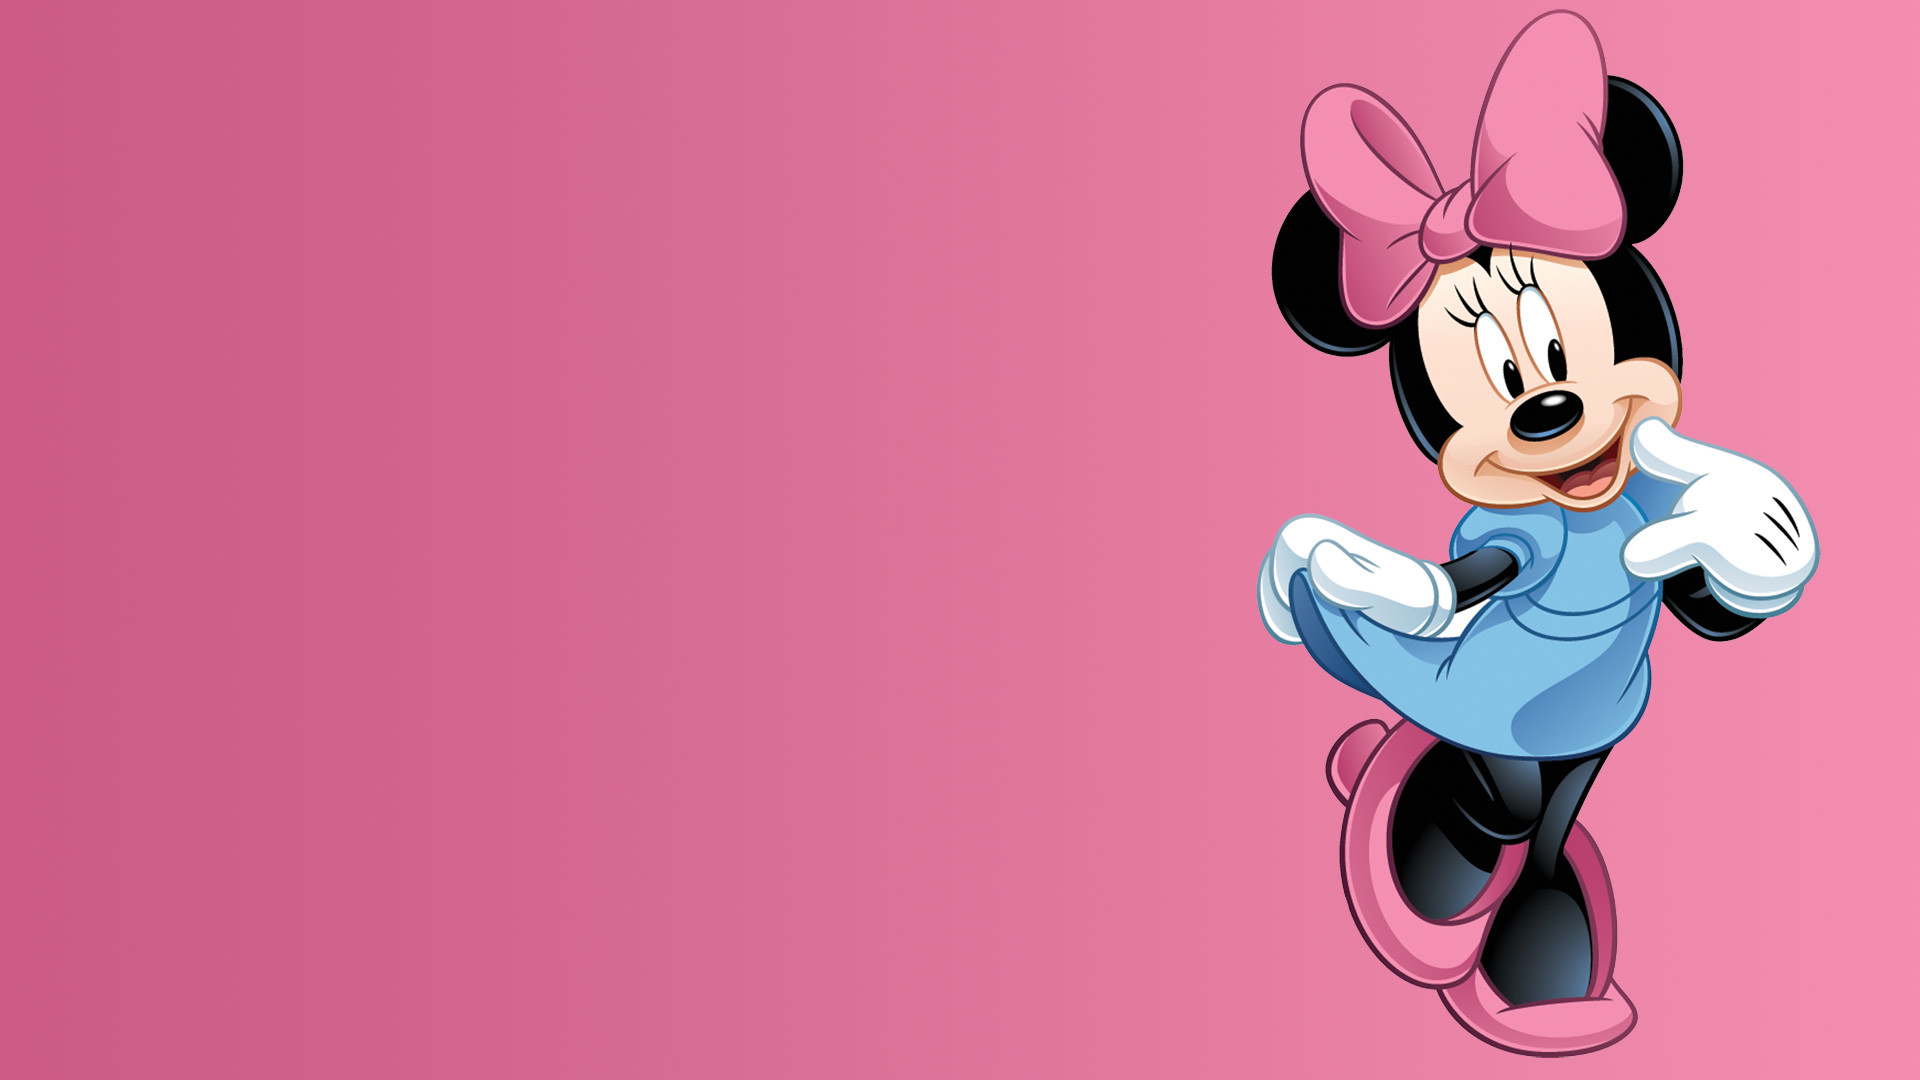 Minnie Mouse Wallpaper HD (60+ images)